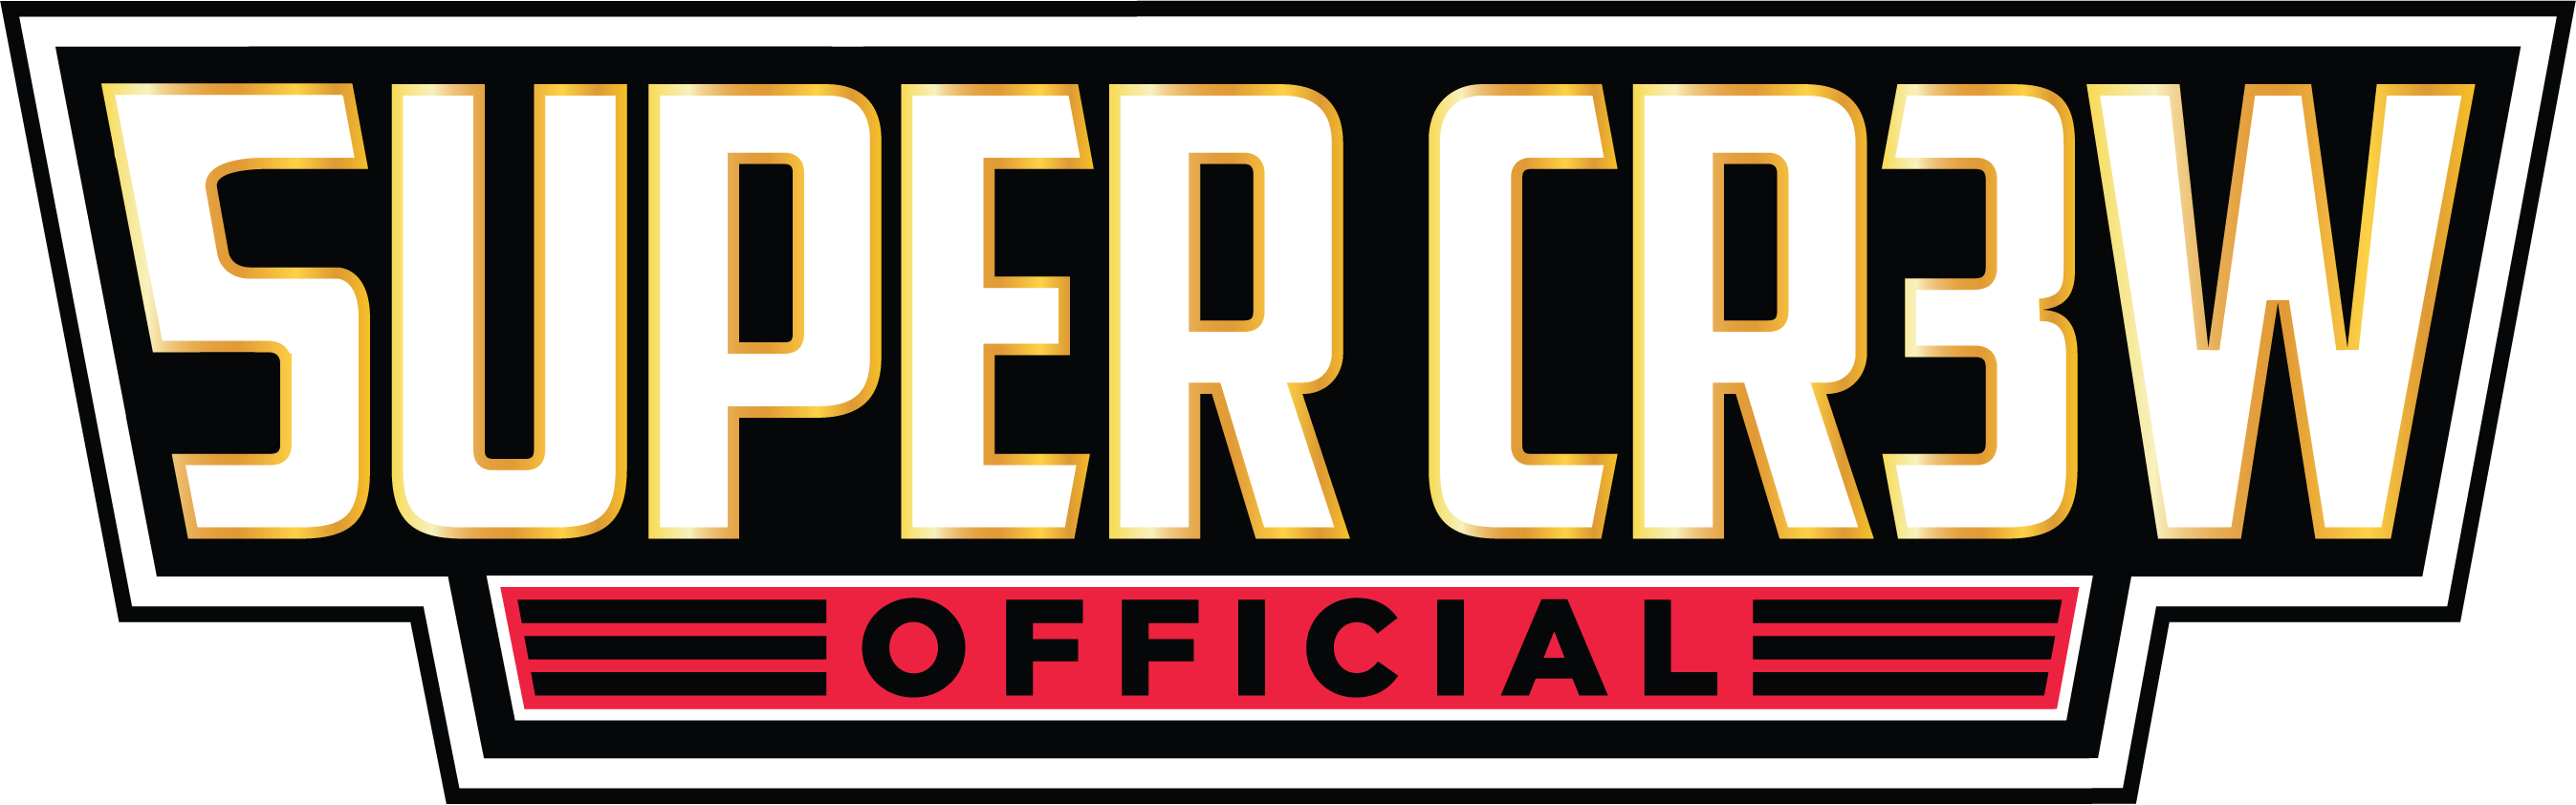 The Supercr3w Official